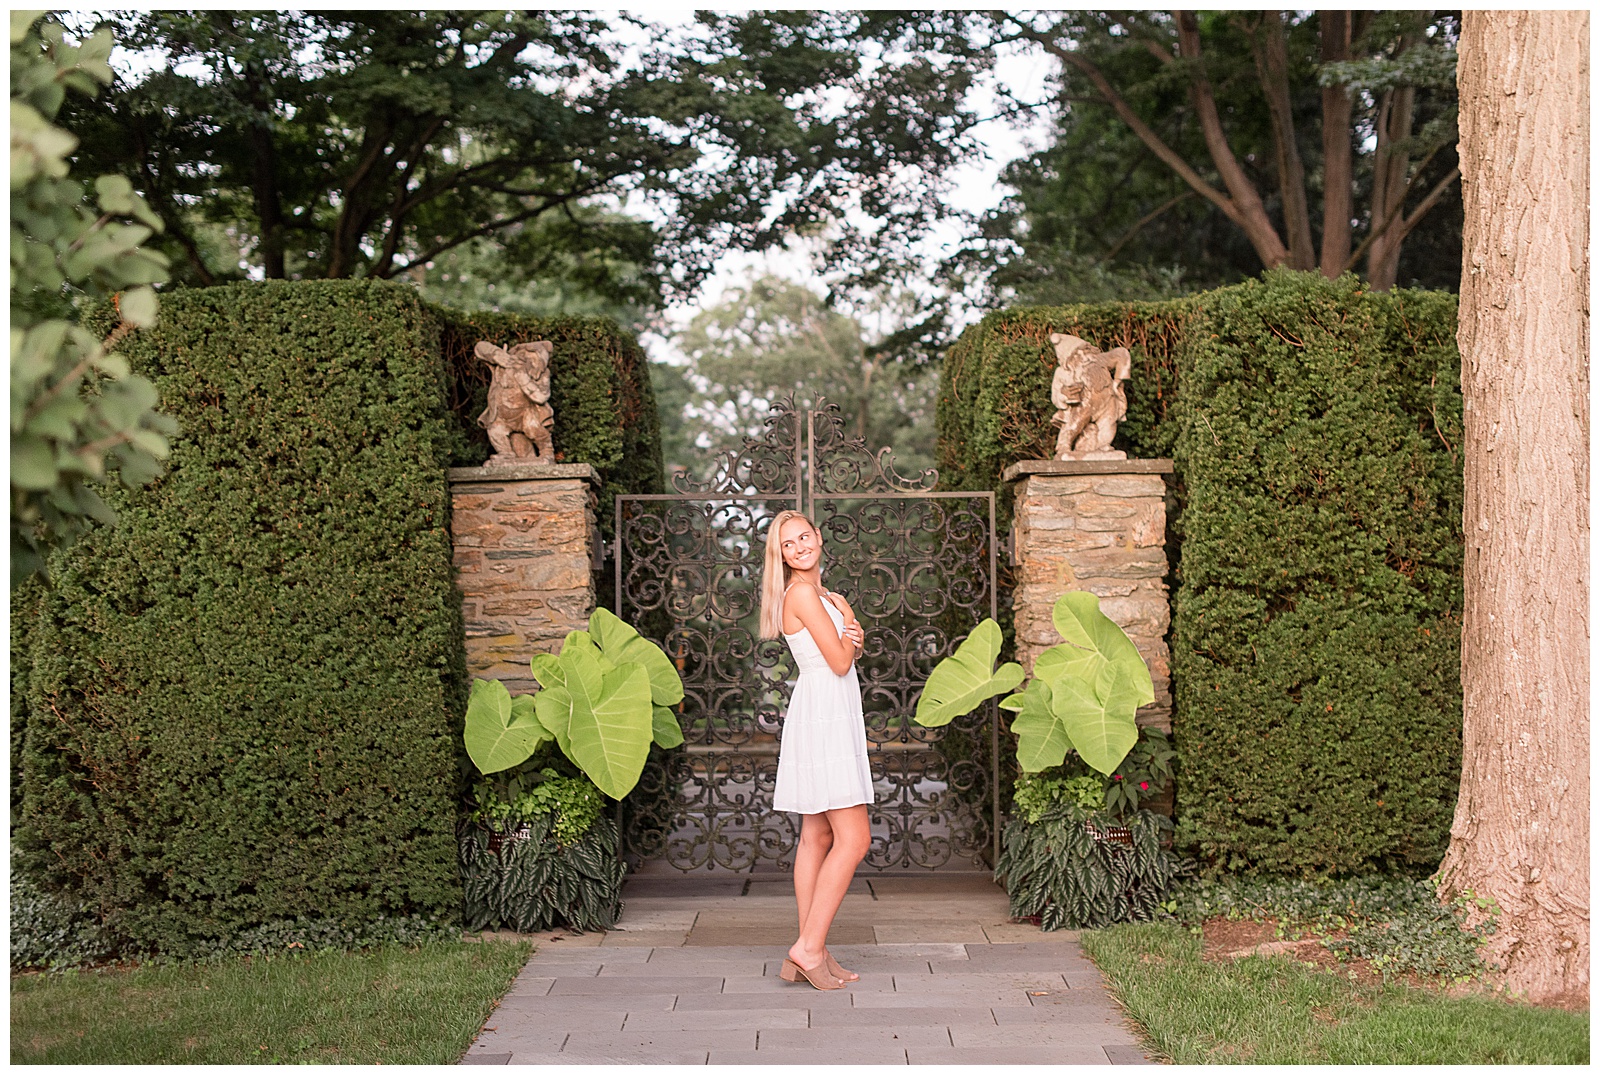 senior session at sunset at Drumore Estate with Iron wrough gate closed behind